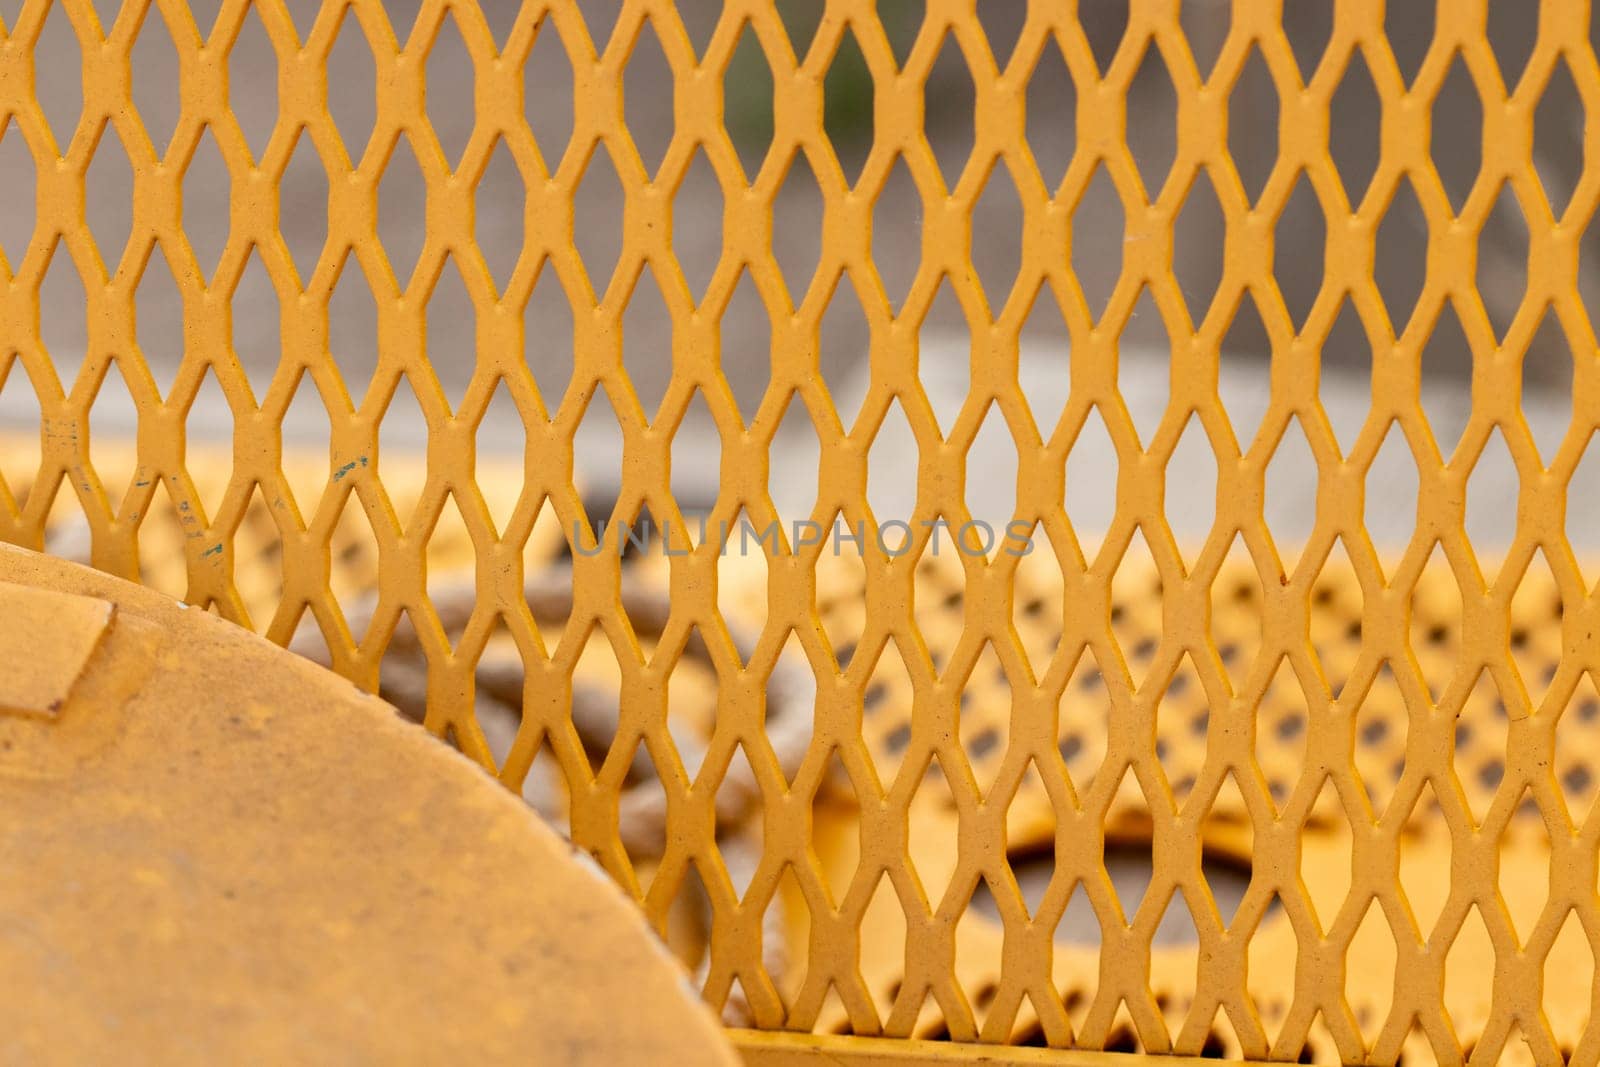 steel mesh background close up of belt guard cover on machine . High quality photo